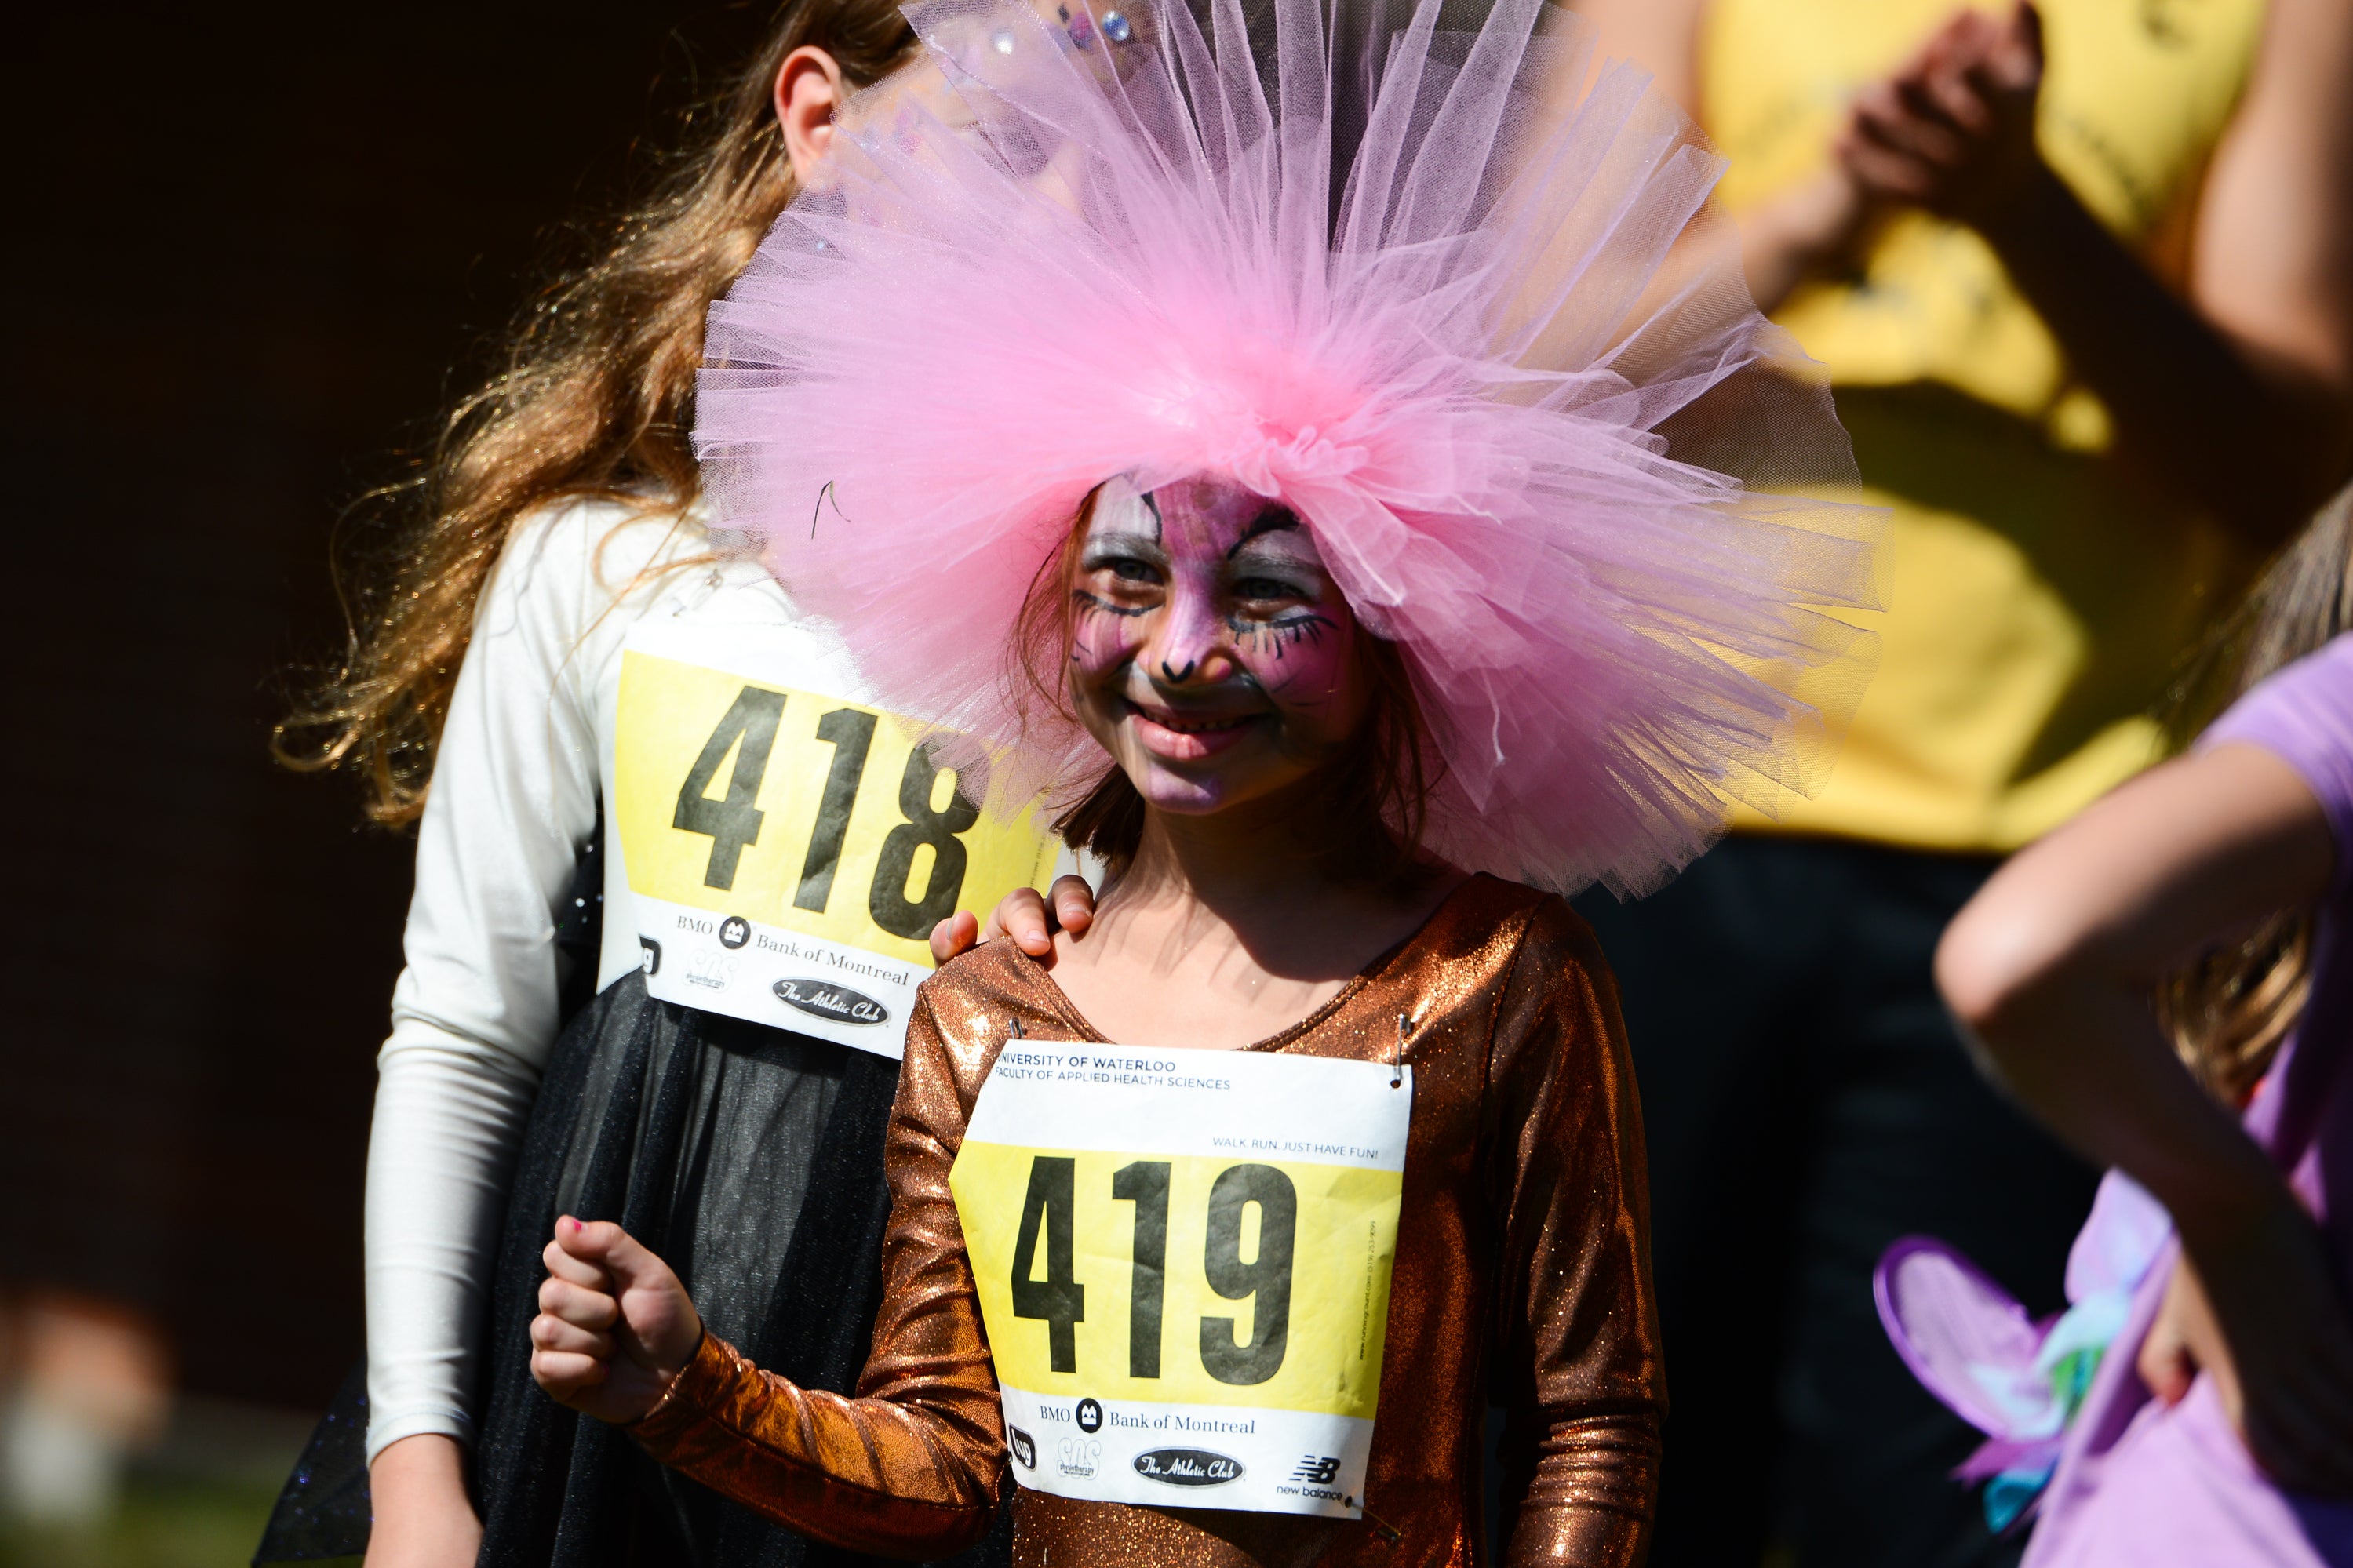 Child participant in costume after run